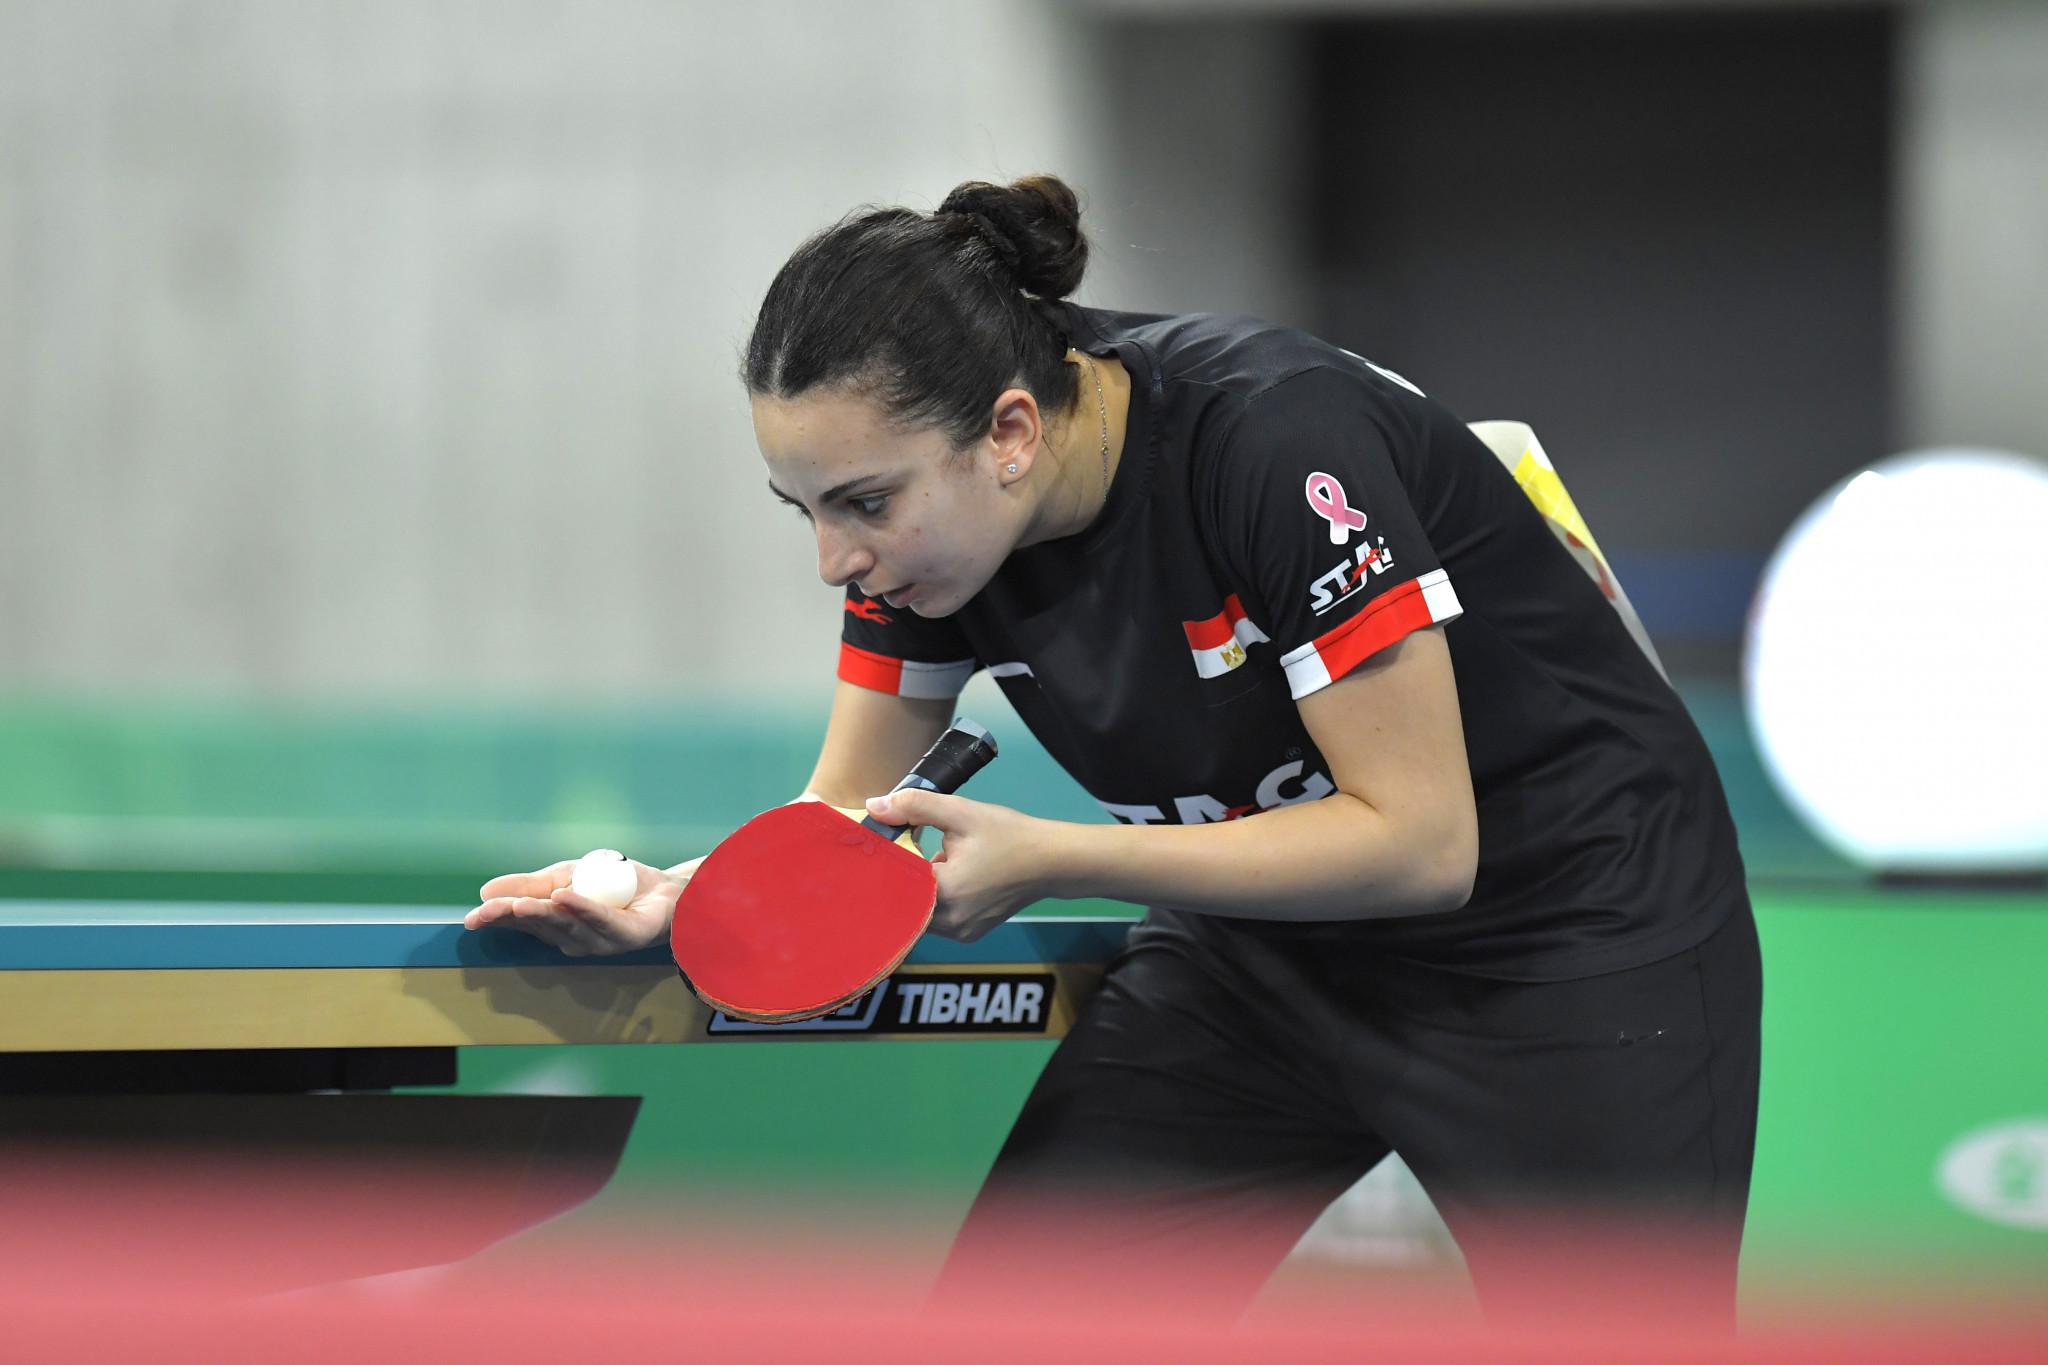 Meshref aiming for fourth consecutive title at ITTF Africa Top 16 Cup